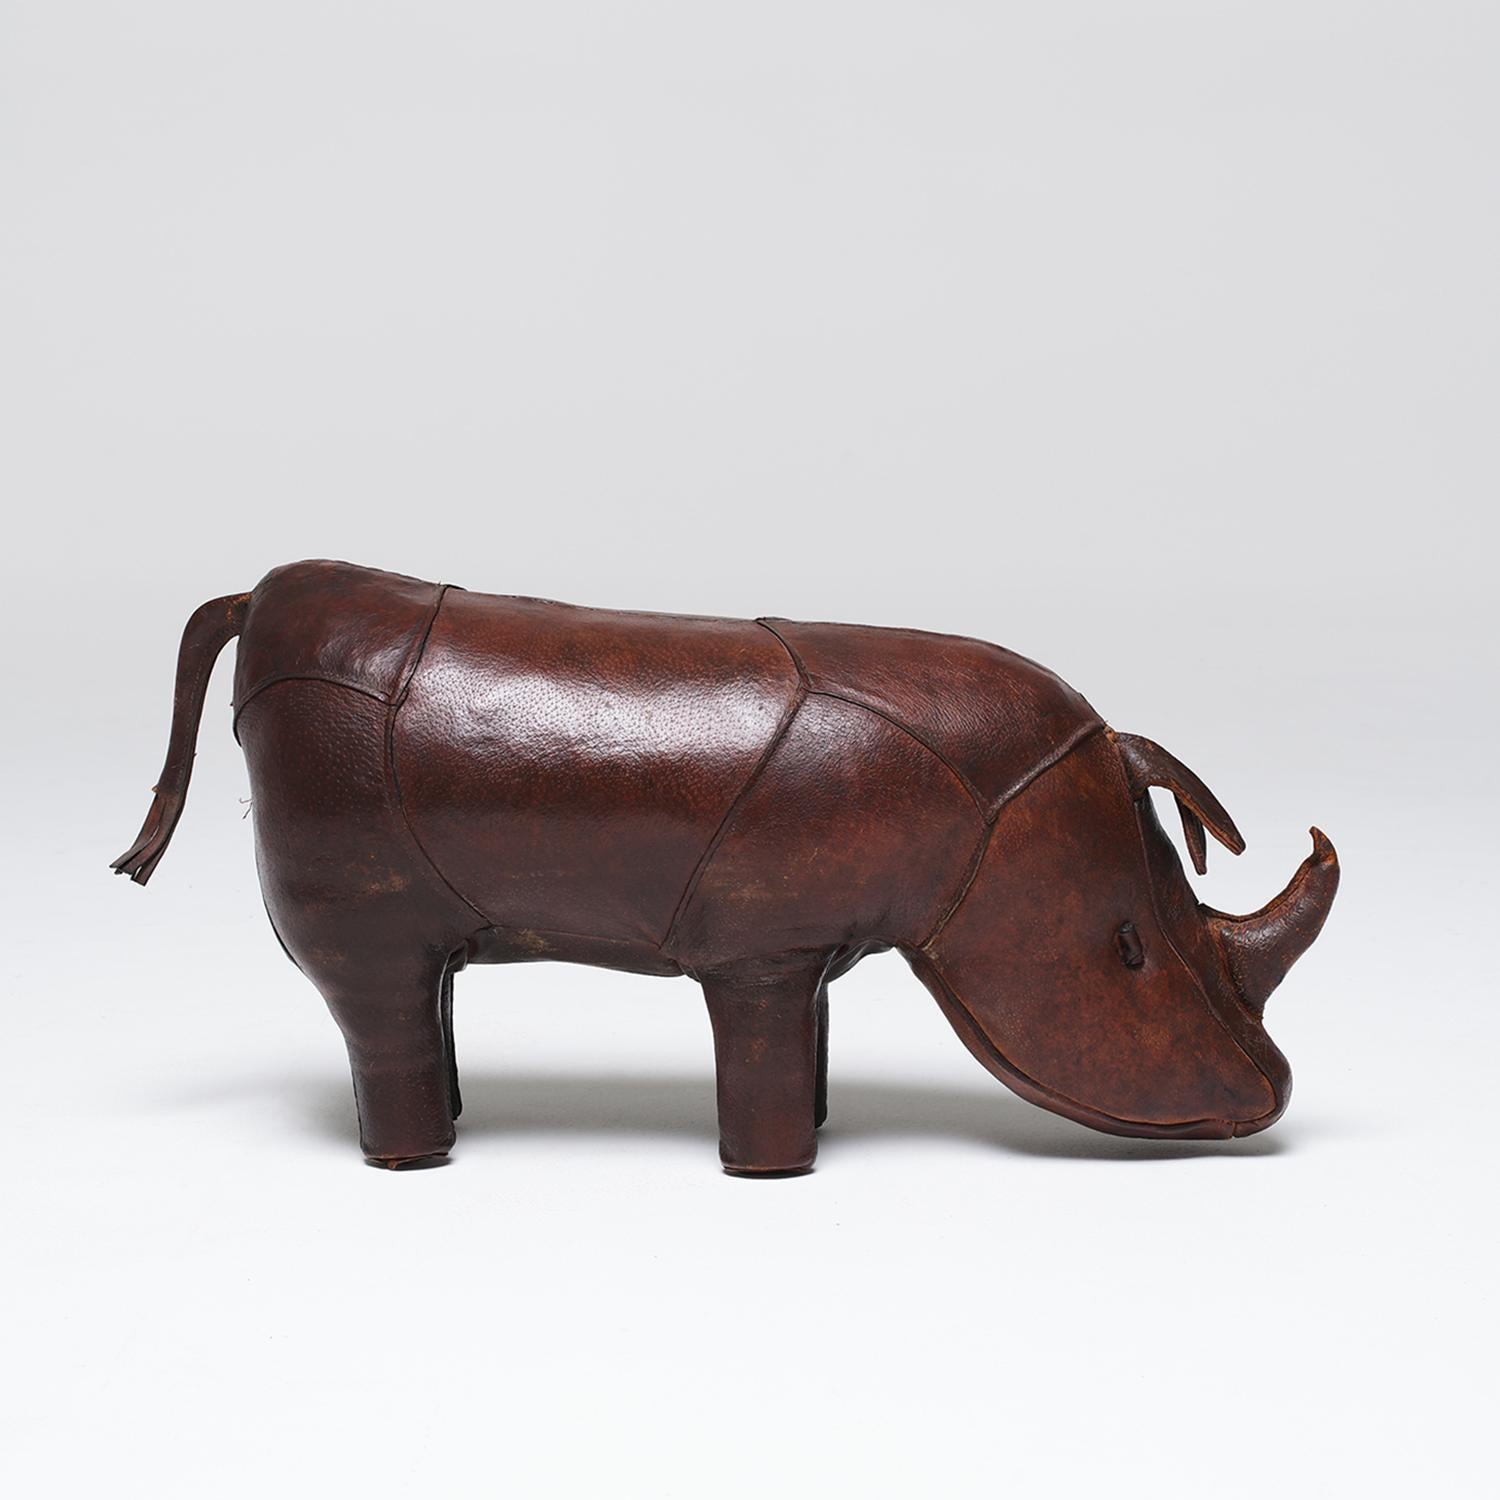 20th Century English Vintage Leather Rhinoceros Footstool by Dimitri Omersa For Sale 7